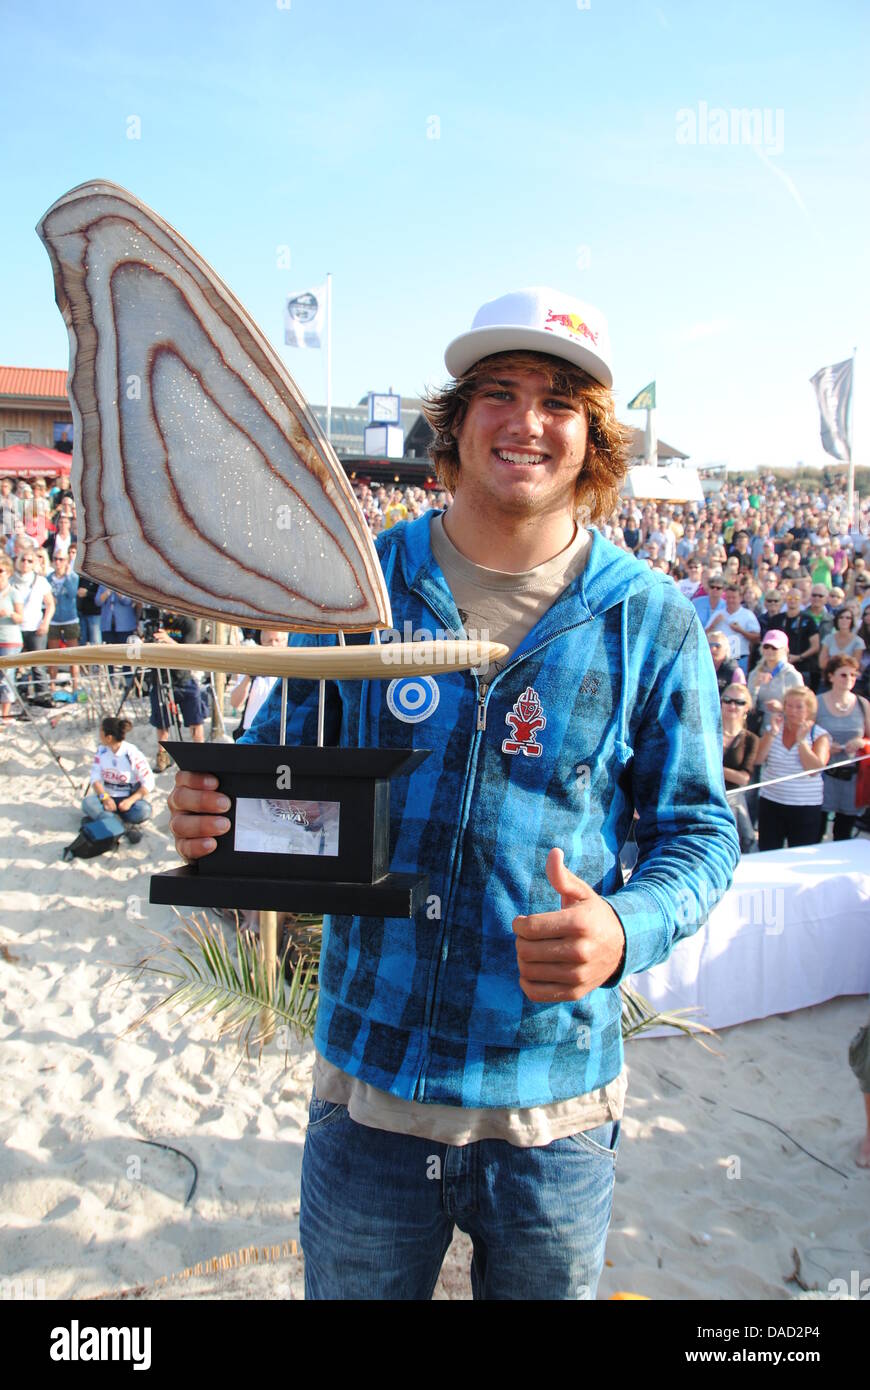 17-year-old German Windsurf World Champion Philip Koester poses with his trophy at Brandenburg beach in Westerland on the island of Sylt, Germany, 02 October 2011. The first German World Champion already claimed the title mid-September in Klitmoeller, Denmark. Photo: Jan Heuer Stock Photo